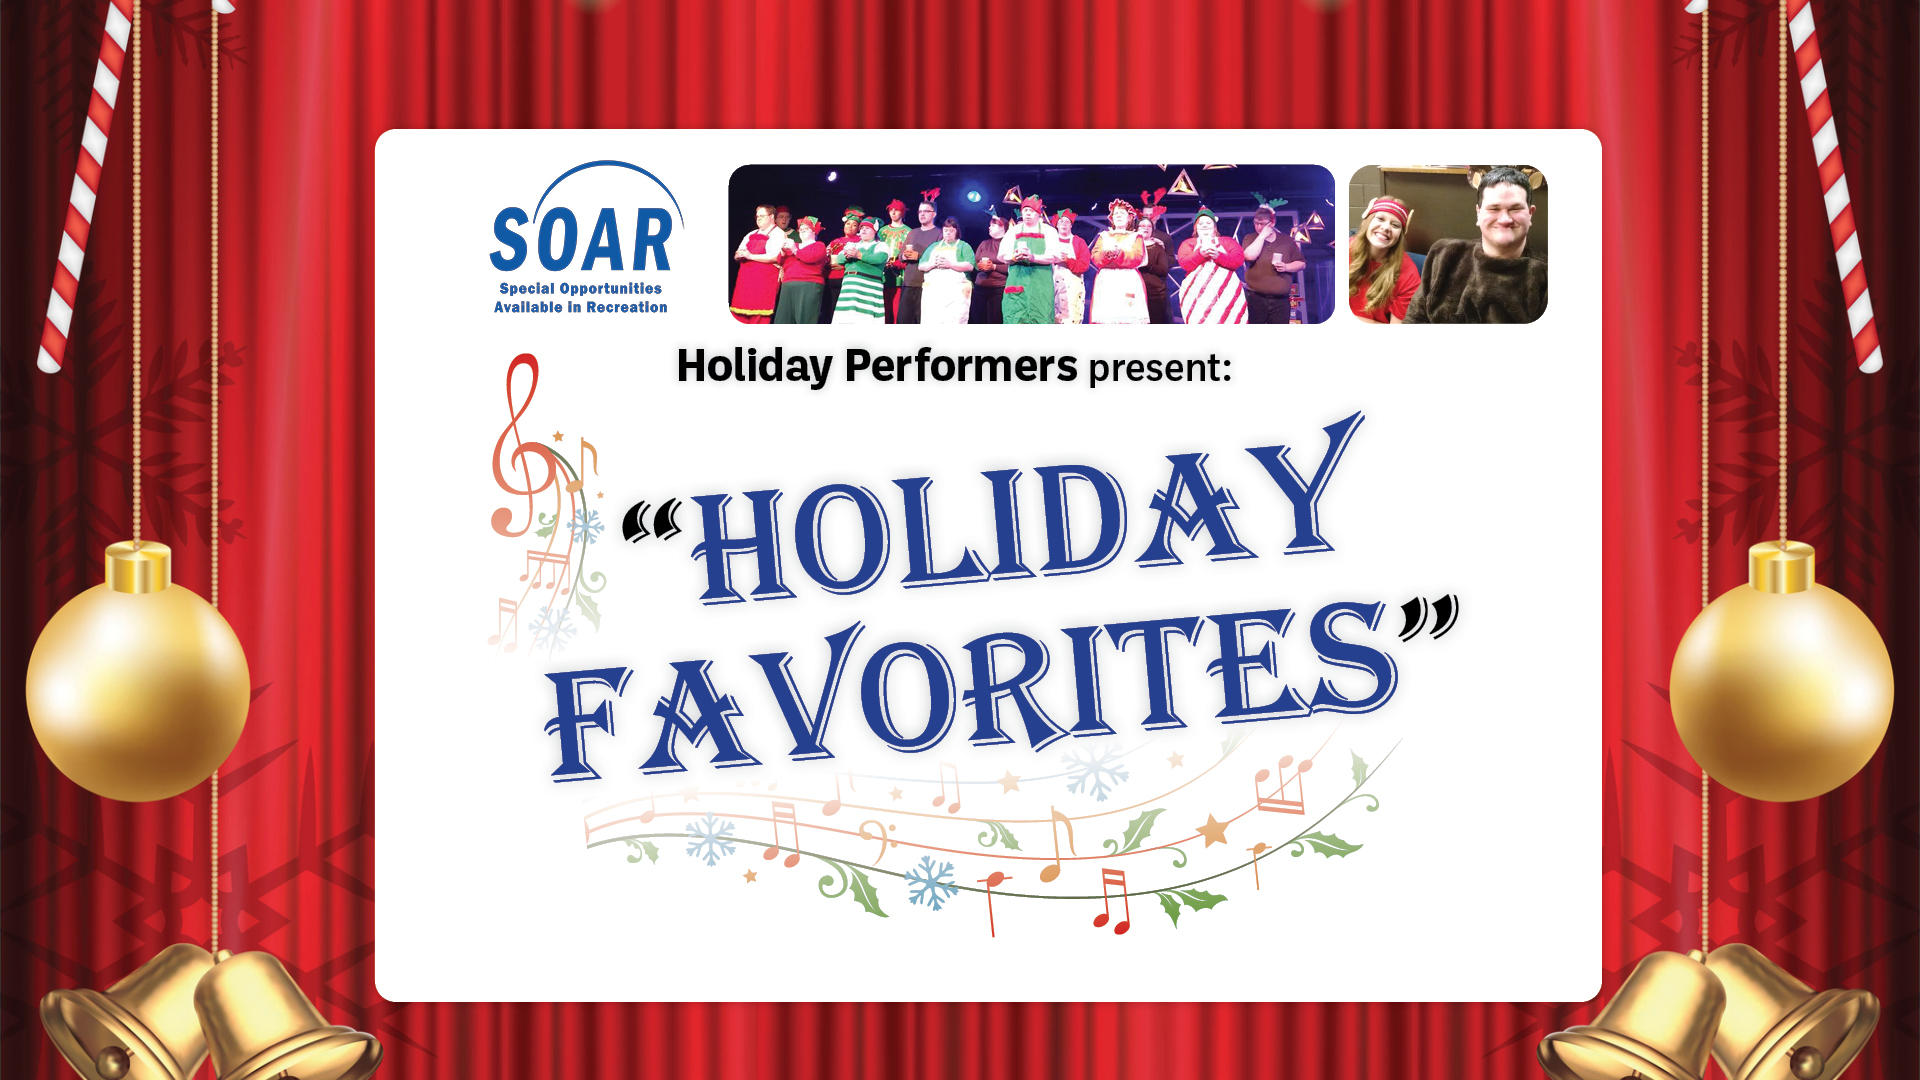 SOAR Holiday Performers present: “Holiday Favorites”